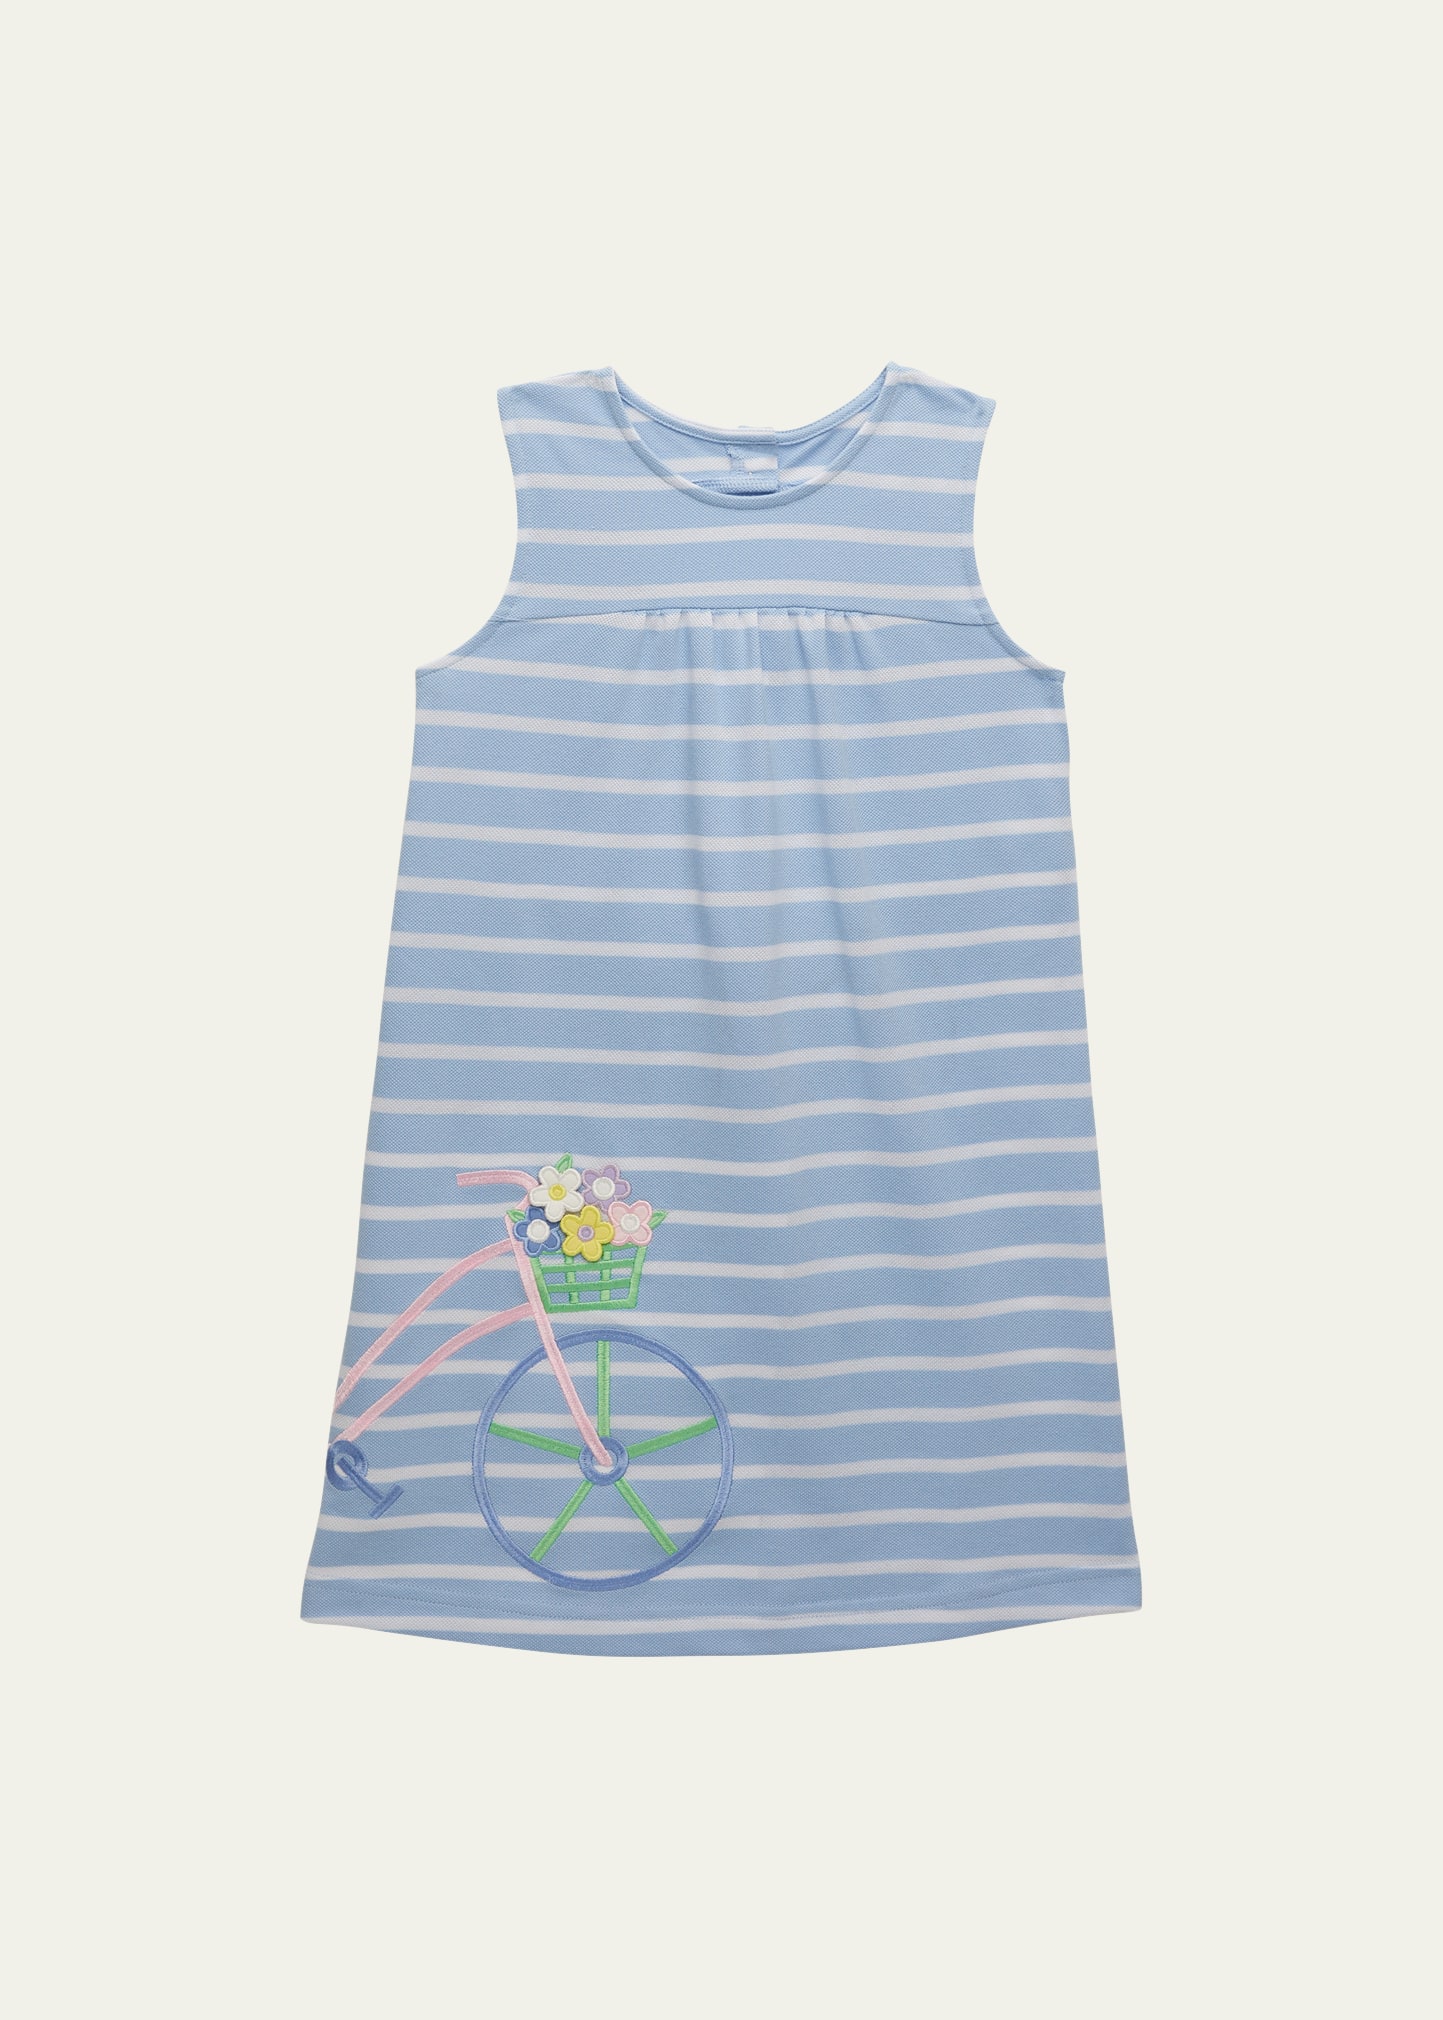 Florence Eiseman Girl's Striped Bicycle Flowers Embroidered Dress, Size 2-6X